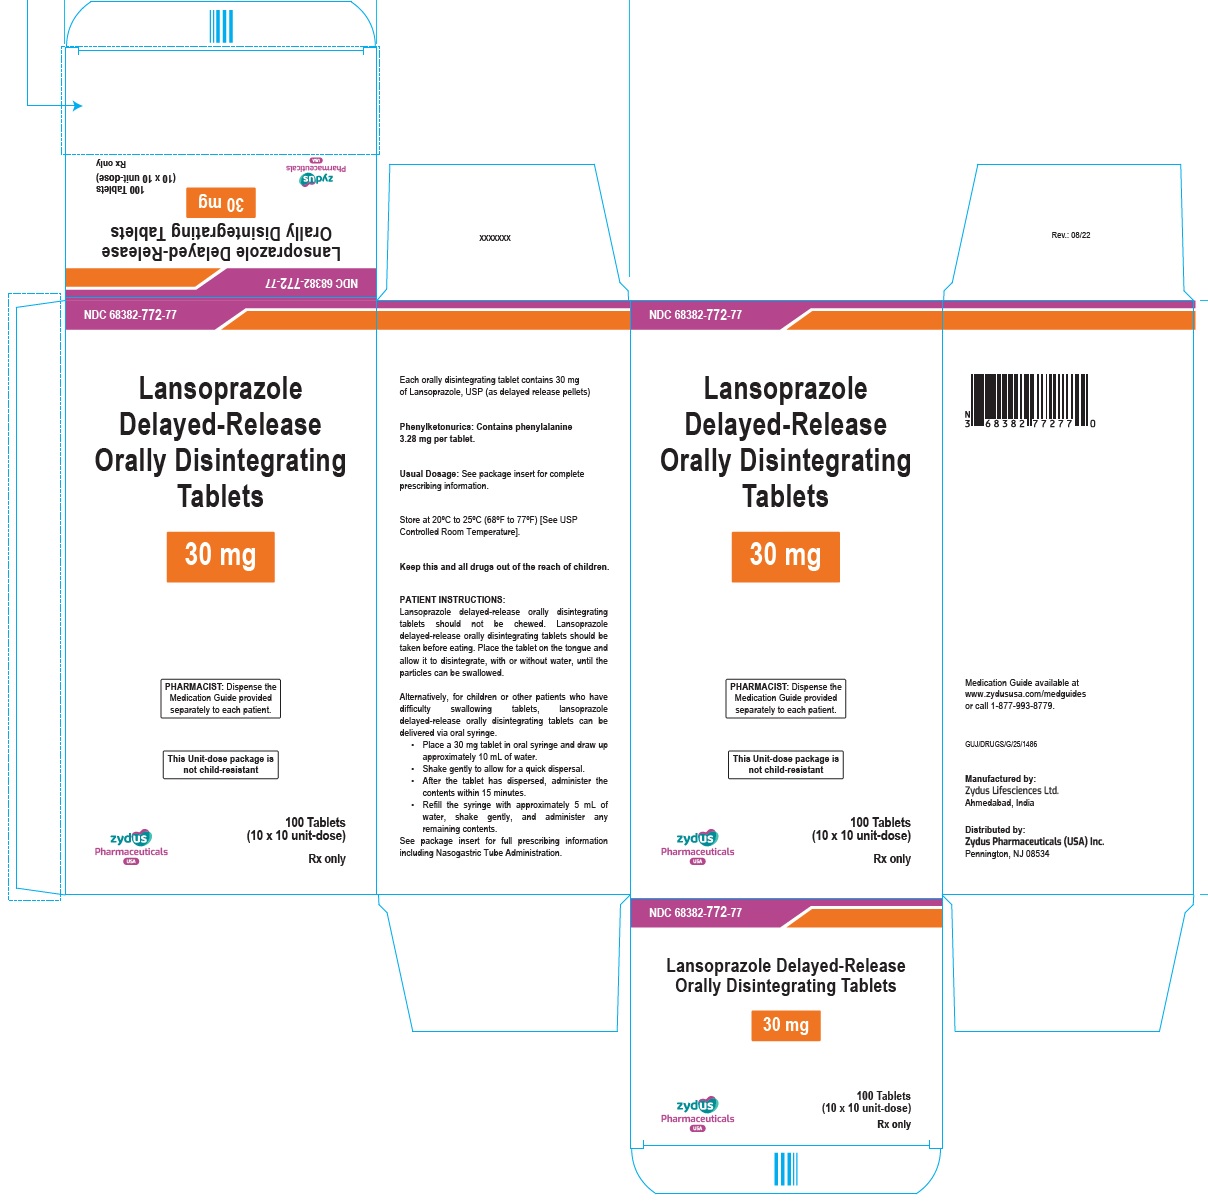 Lansoprazole delayed-release orally disintegrating tablets, 30 mg